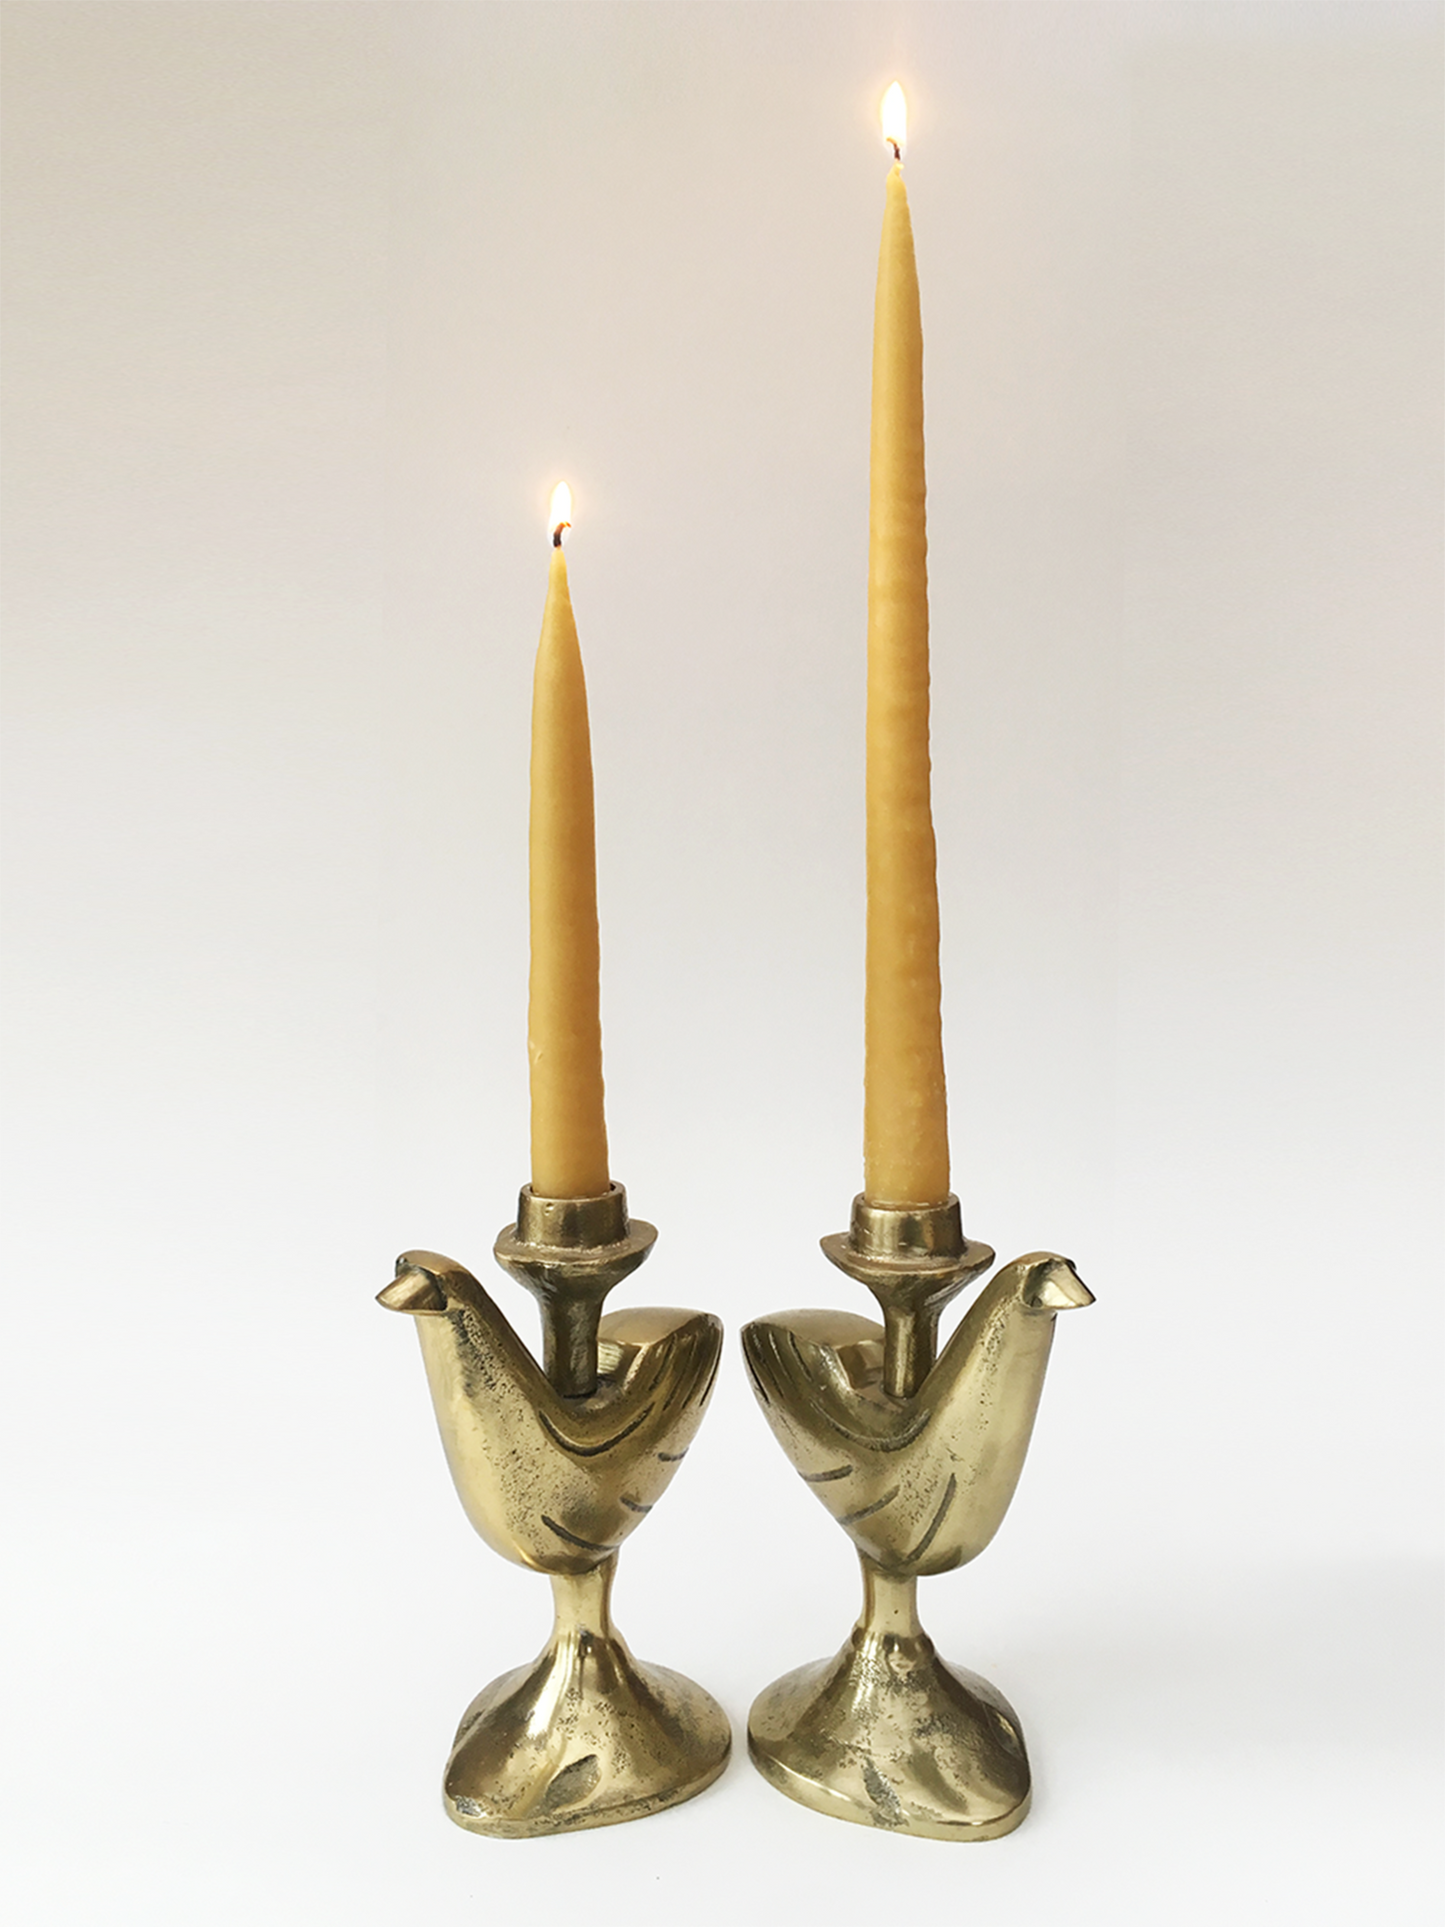 Tall Pair of Hand Dipped Taper Beeswax Candles